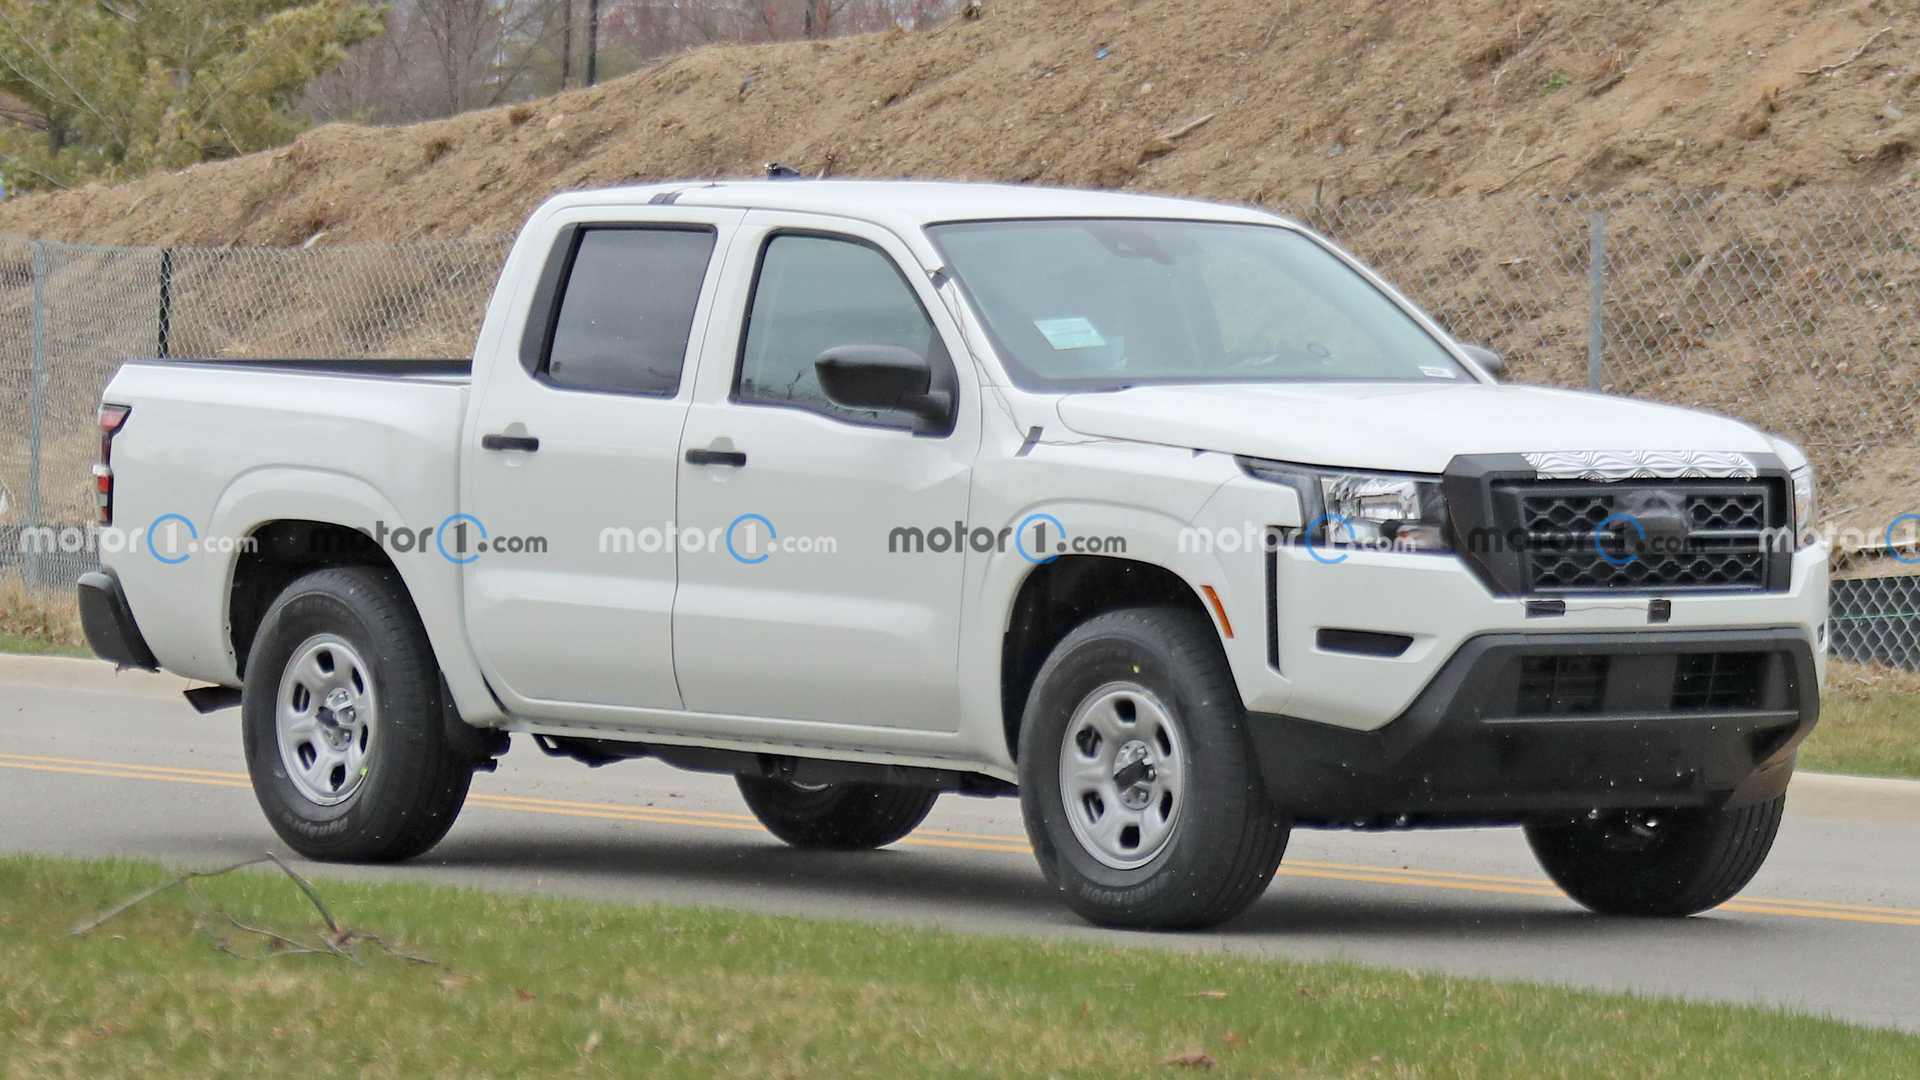 Nissan Frontier S Caught On Camera Showing Its Base Model Attire